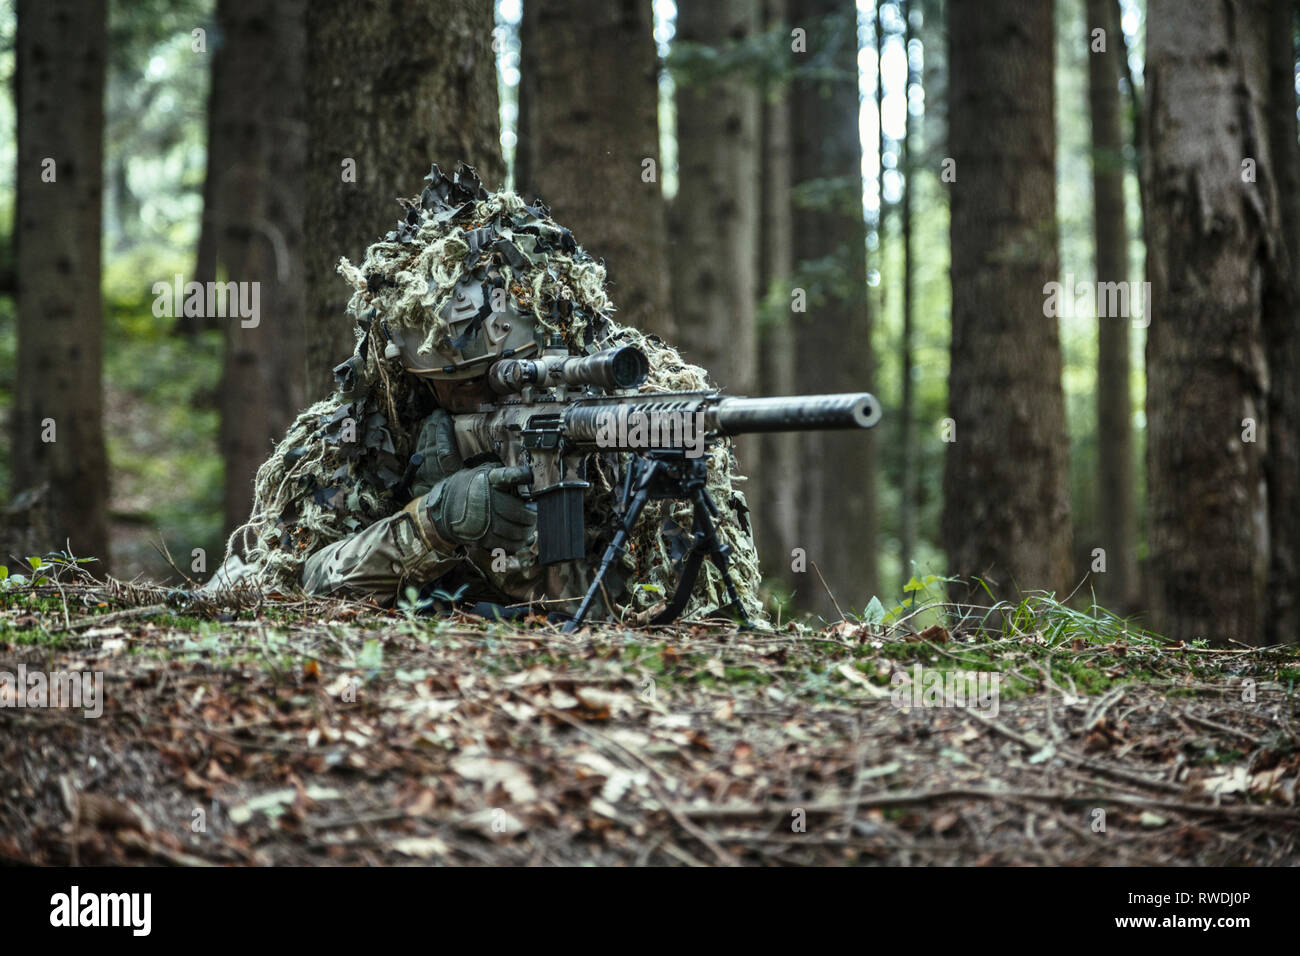 United States Army ranger sniper wearing ghillie suit. Stock Photo